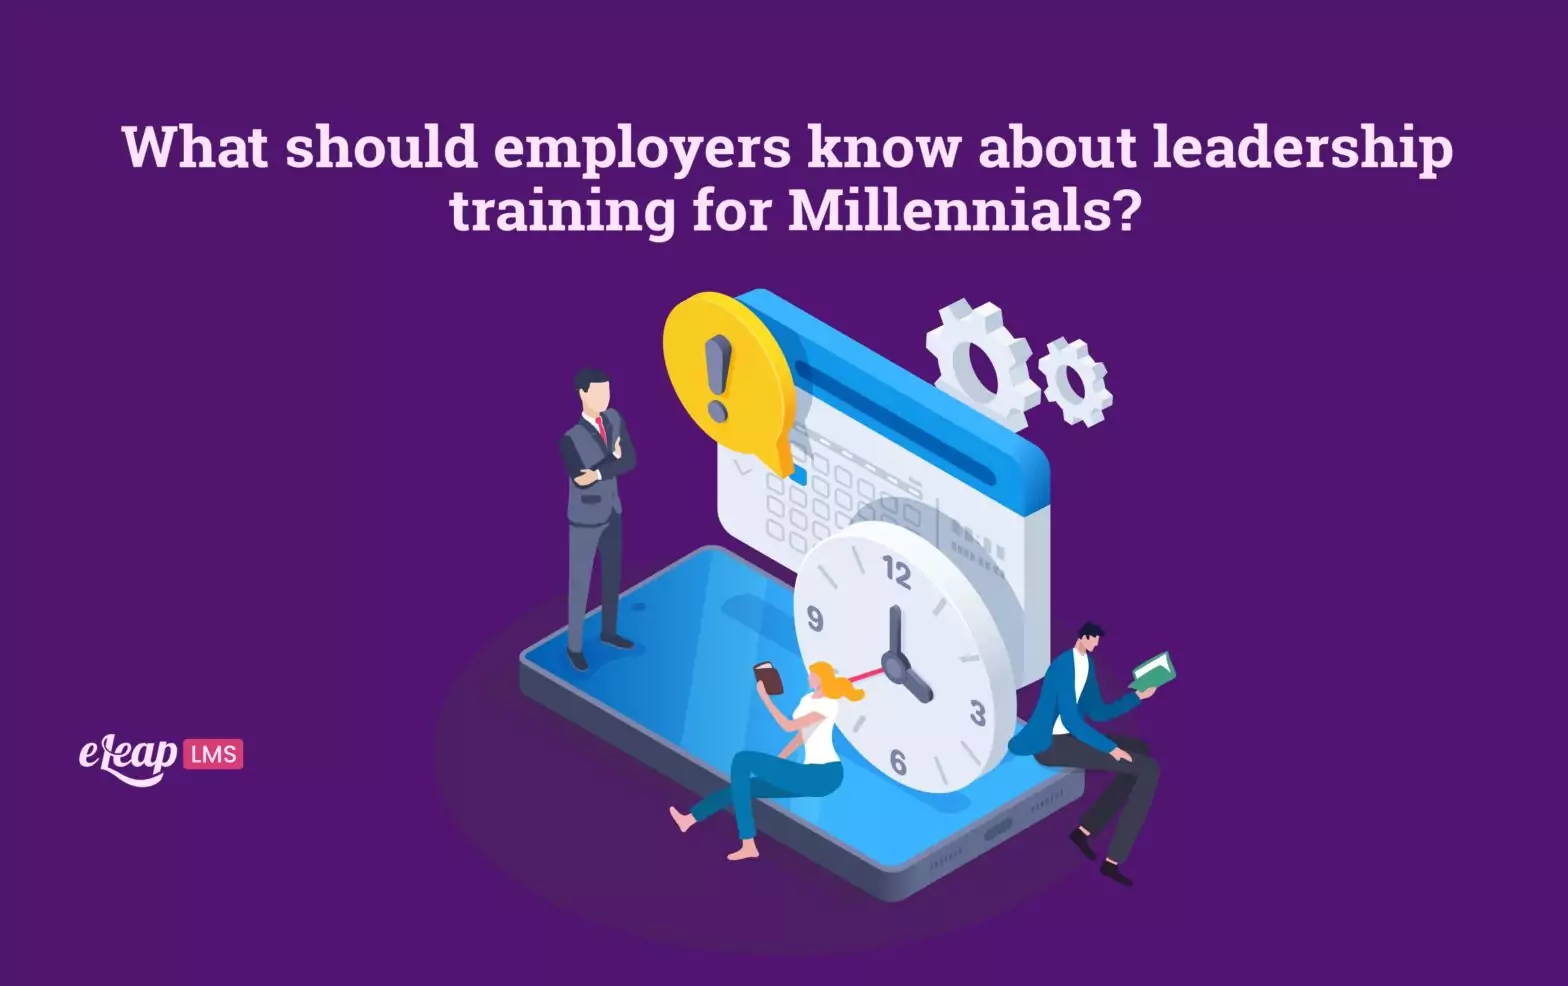 What should employers know about leadership training for Millennials?